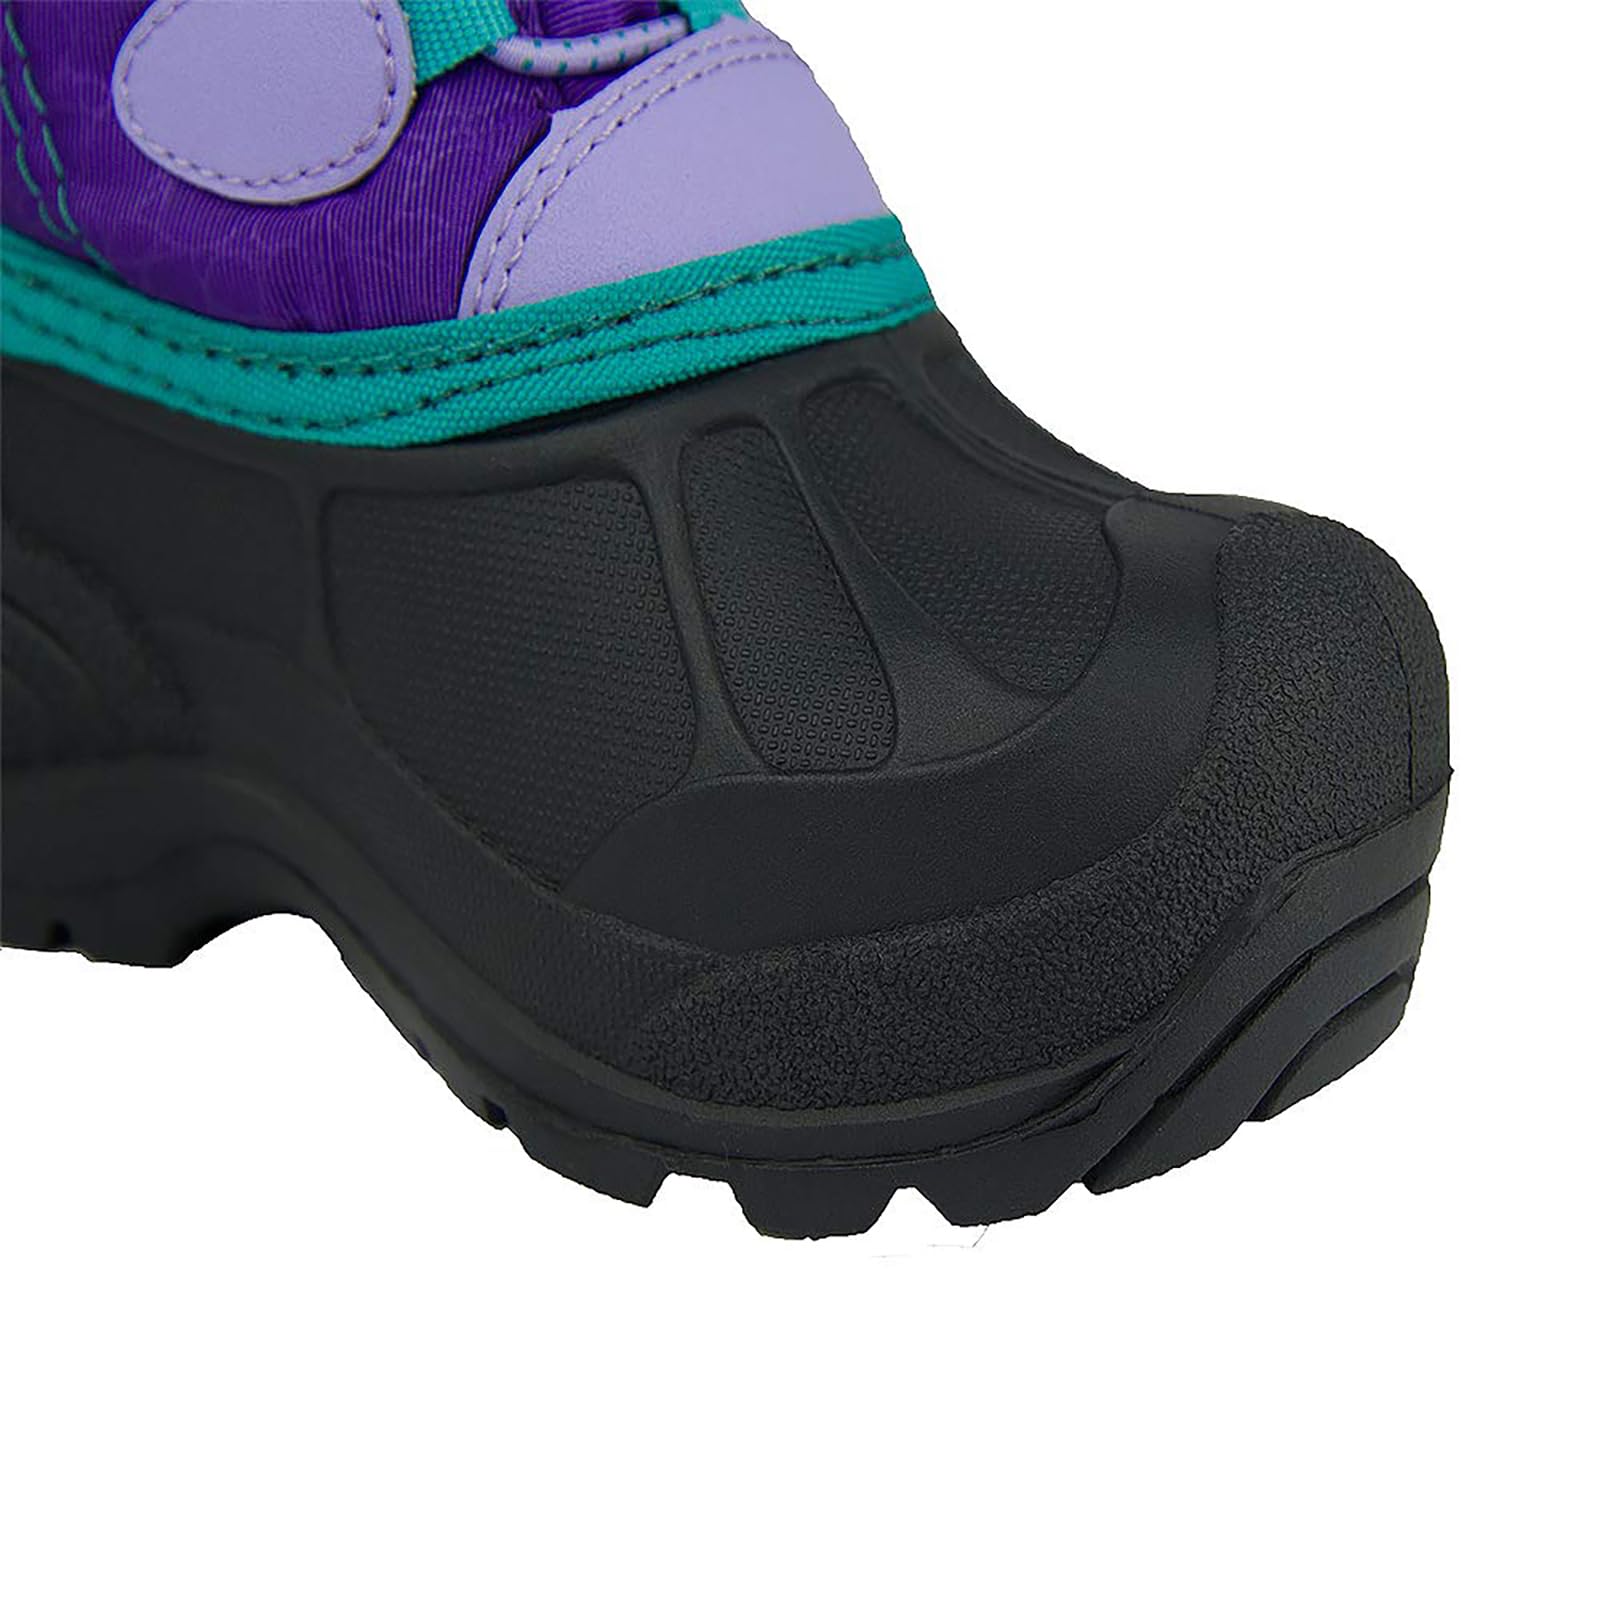 ICEFACE Kids Winter Snow Boots Waterproof and Insulated for Girls and Boys